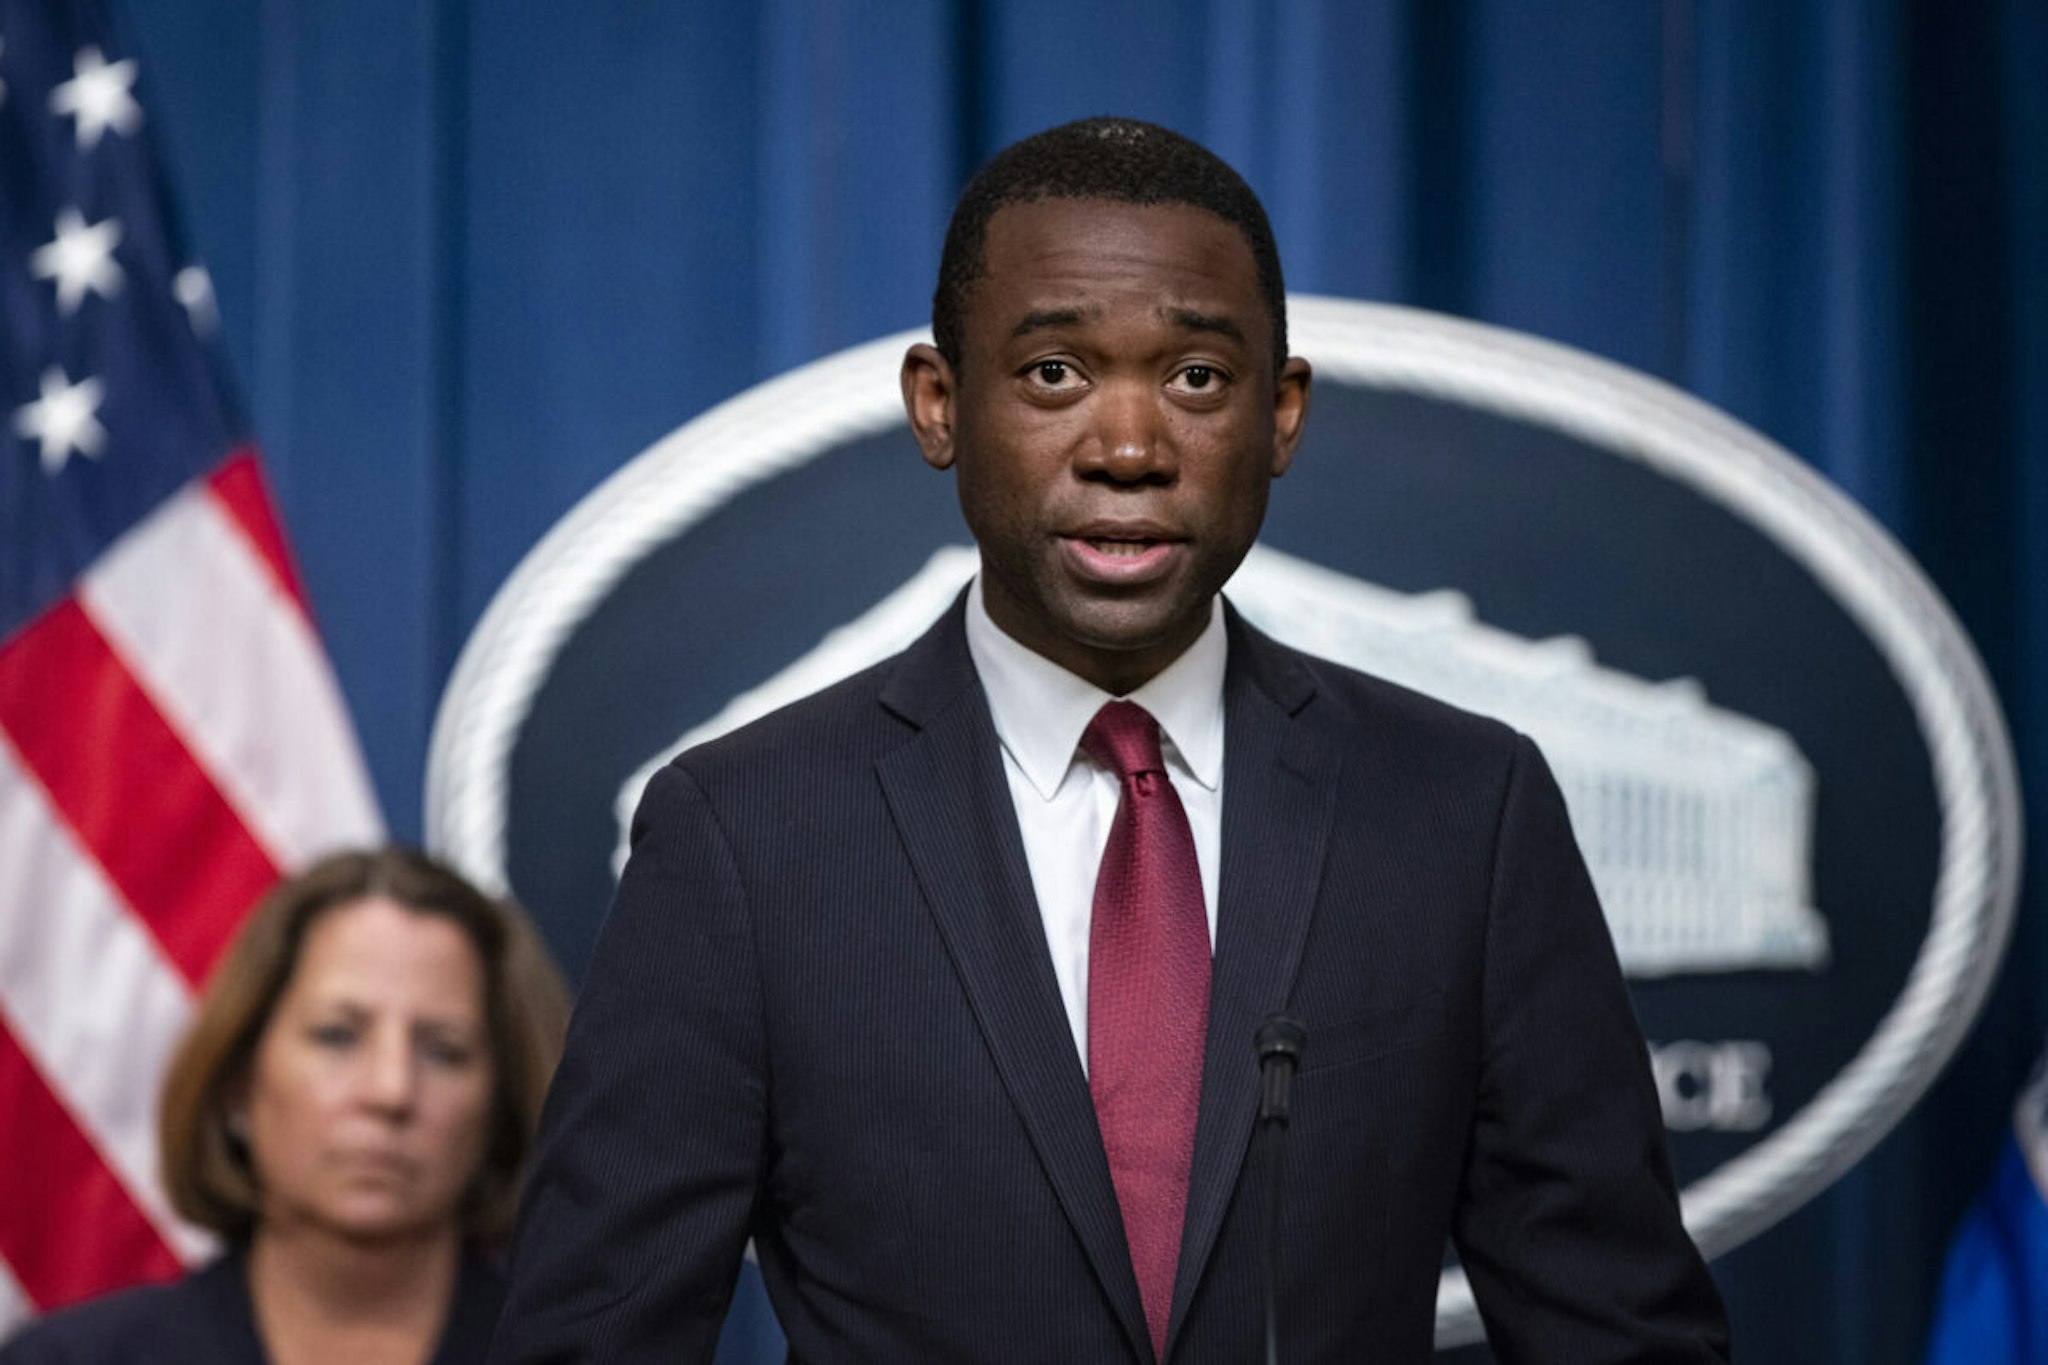 Wally Adeyemo, deputy US Treasury secretary, speaks during a news conference at the Department of Justice in Washington, DC, US, on Wednesday, Jan. 18, 2023.